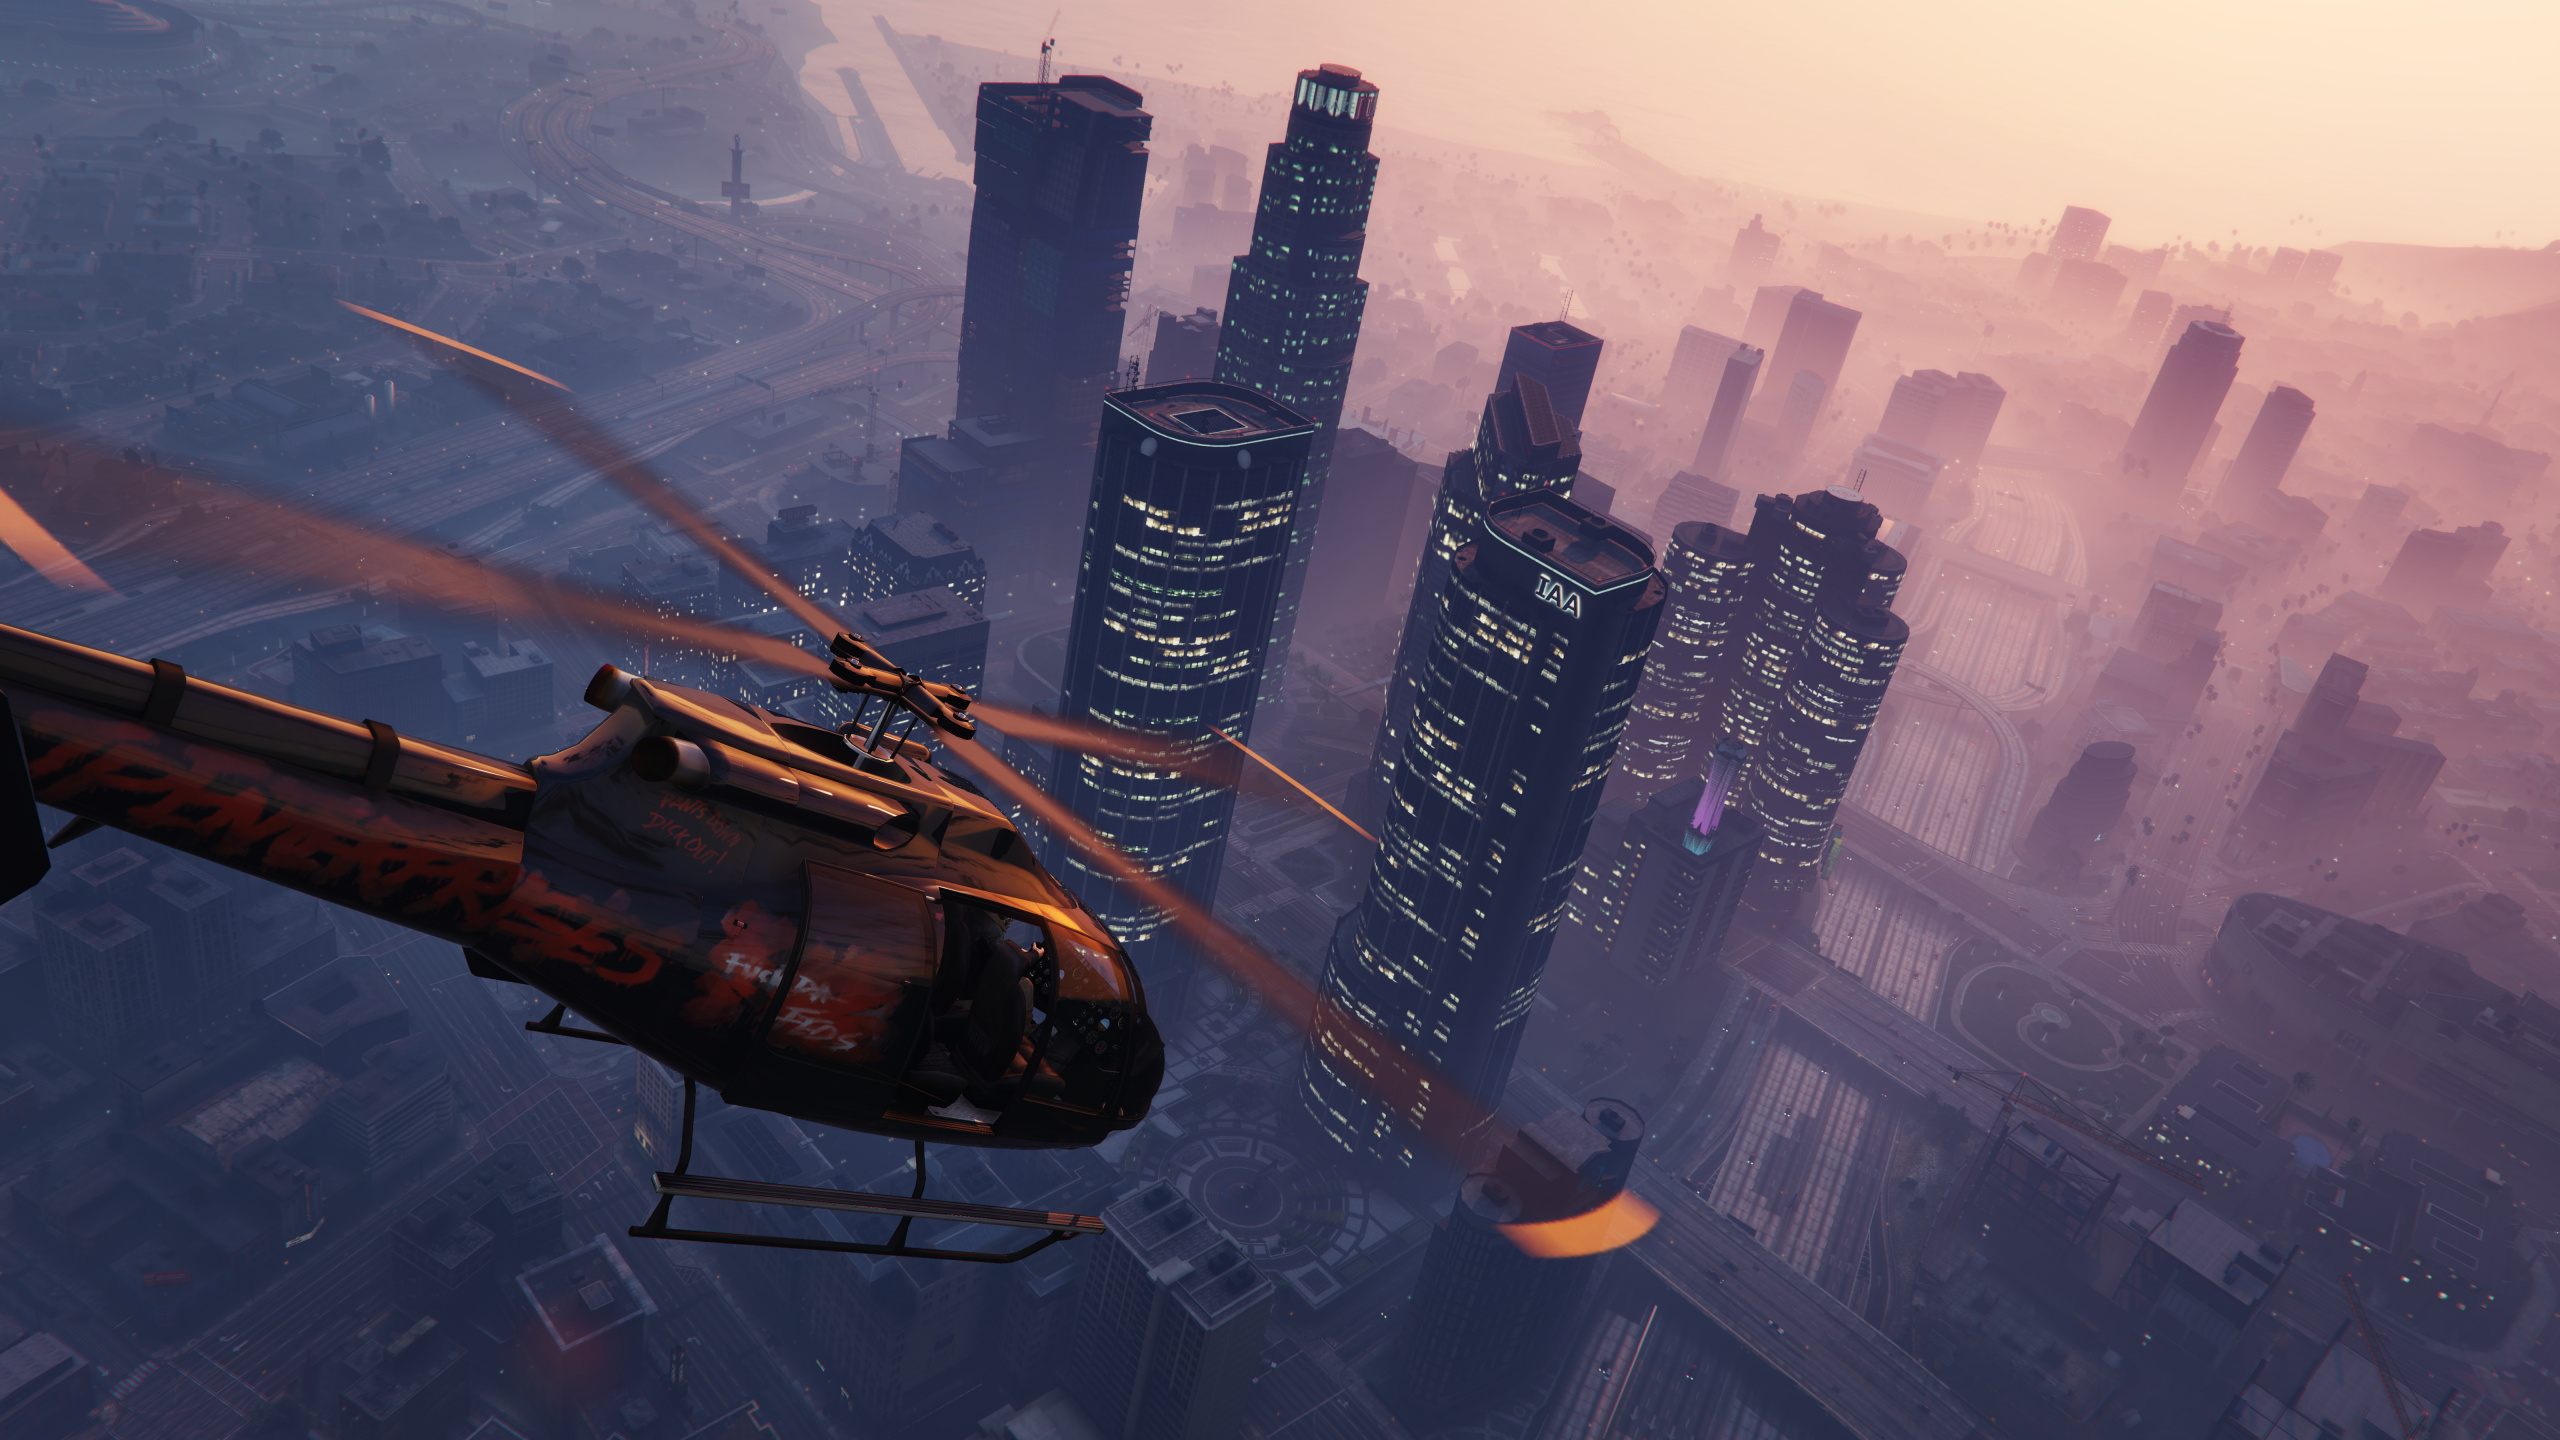 Grand Theft Auto v, pc Game, Mod, Grand Theft Auto Online, Video Games. Wallpaper in 2560x1440 Resolution